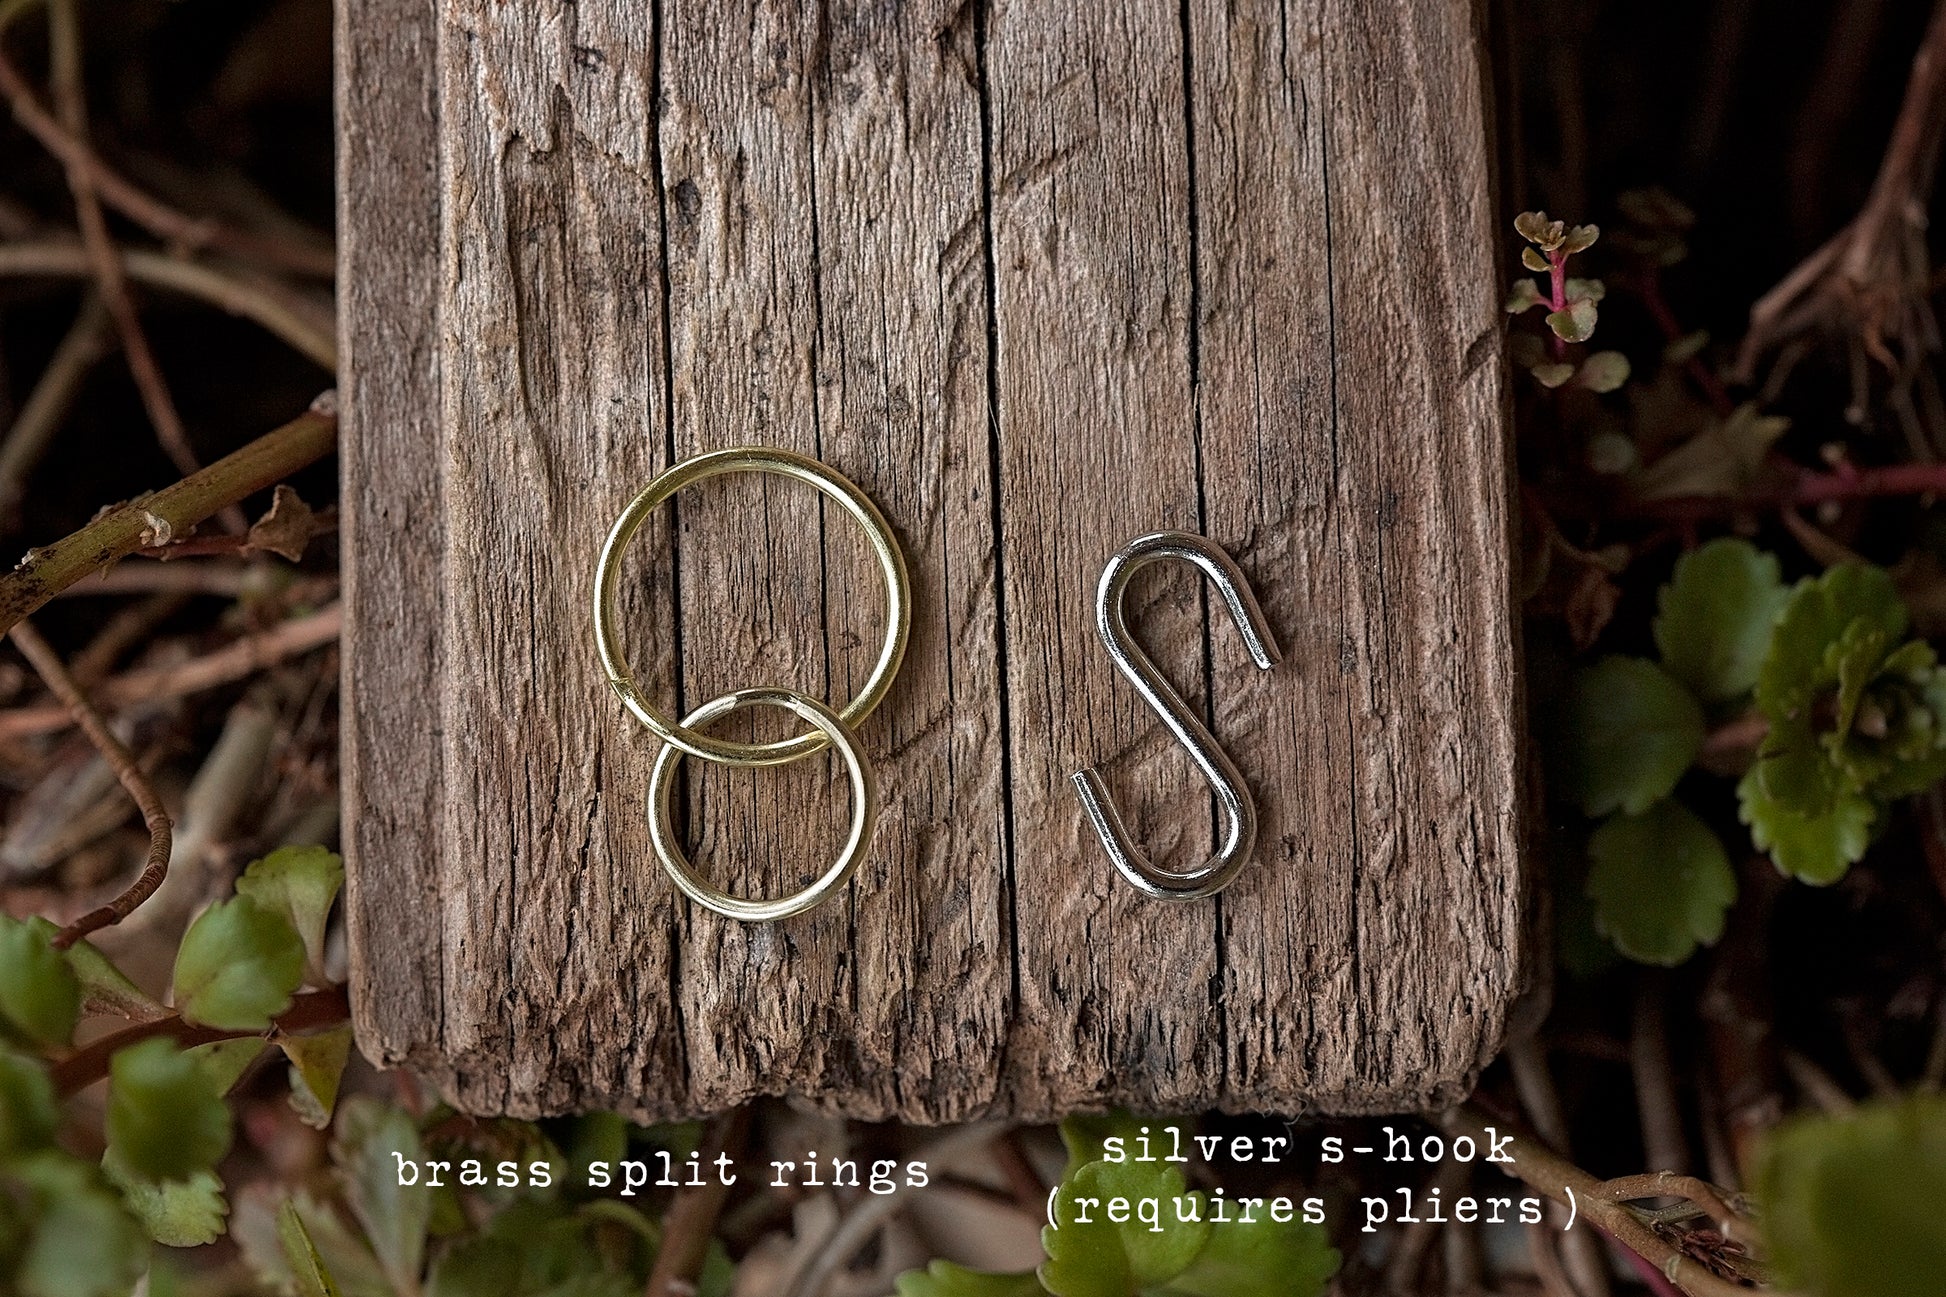 You can choose between brass split rings or a silver s-hook for attaching the tag to your pet's collar.  The silver s-hook requires the use of pliers.